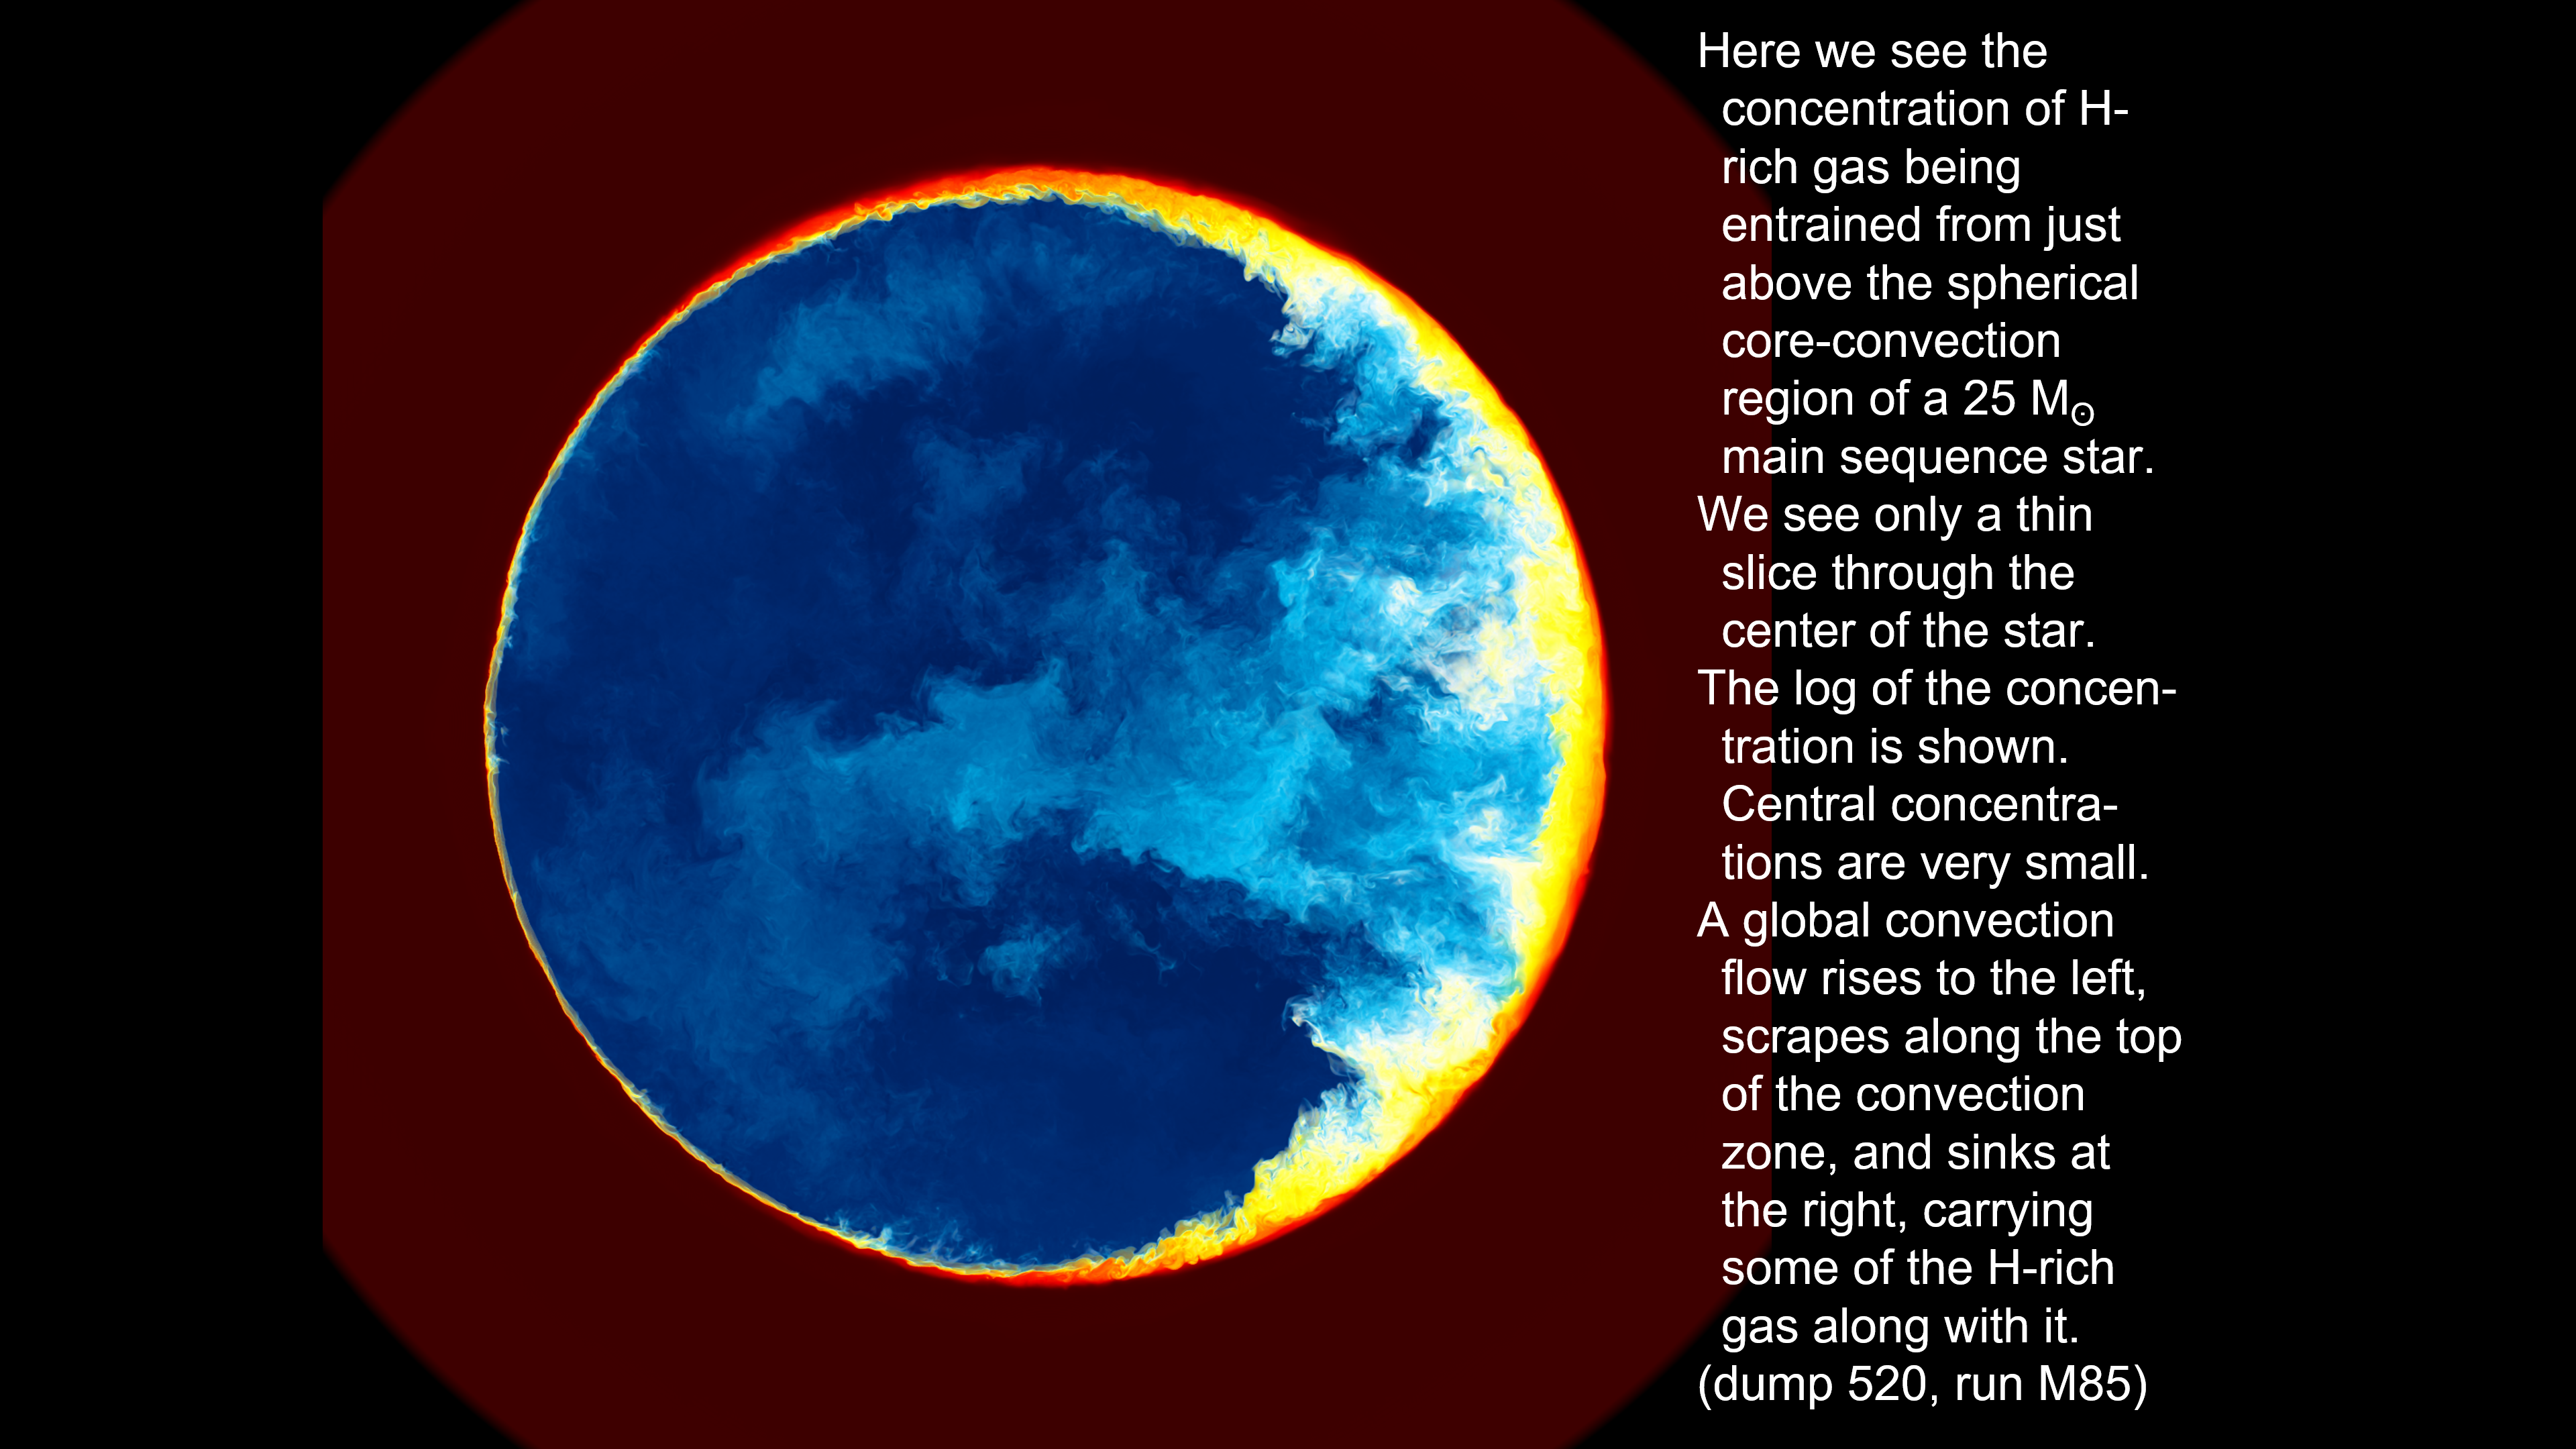 Simulation of the core-convection region of a 25 M☉ main sequence star.